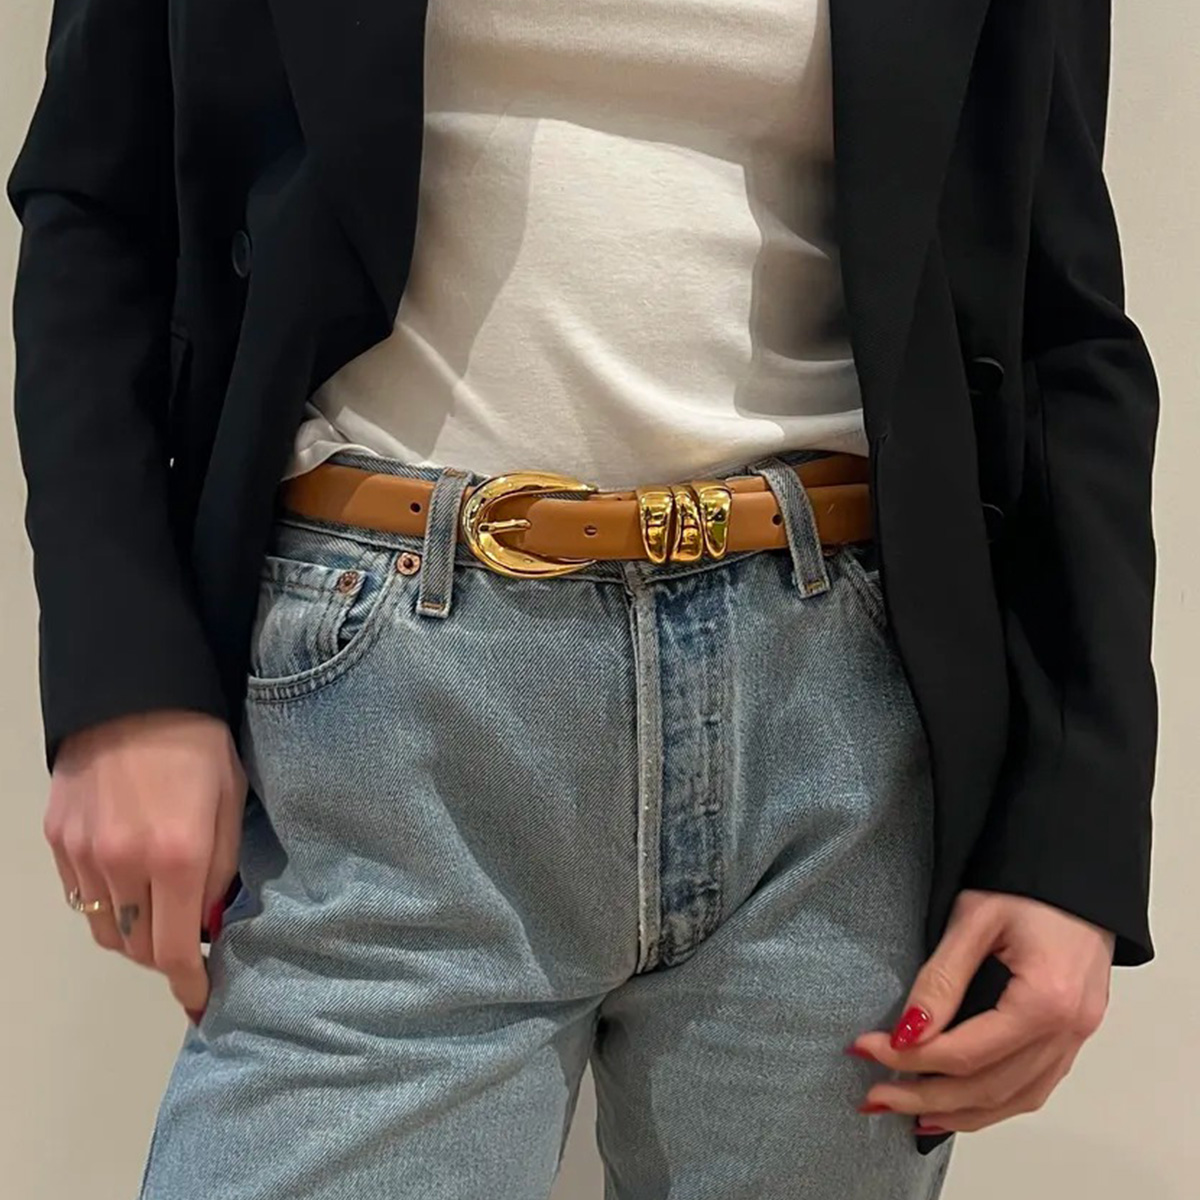 NGL, This $58 Madewell Belt Is Maybe My Best Buy of the Season So Far